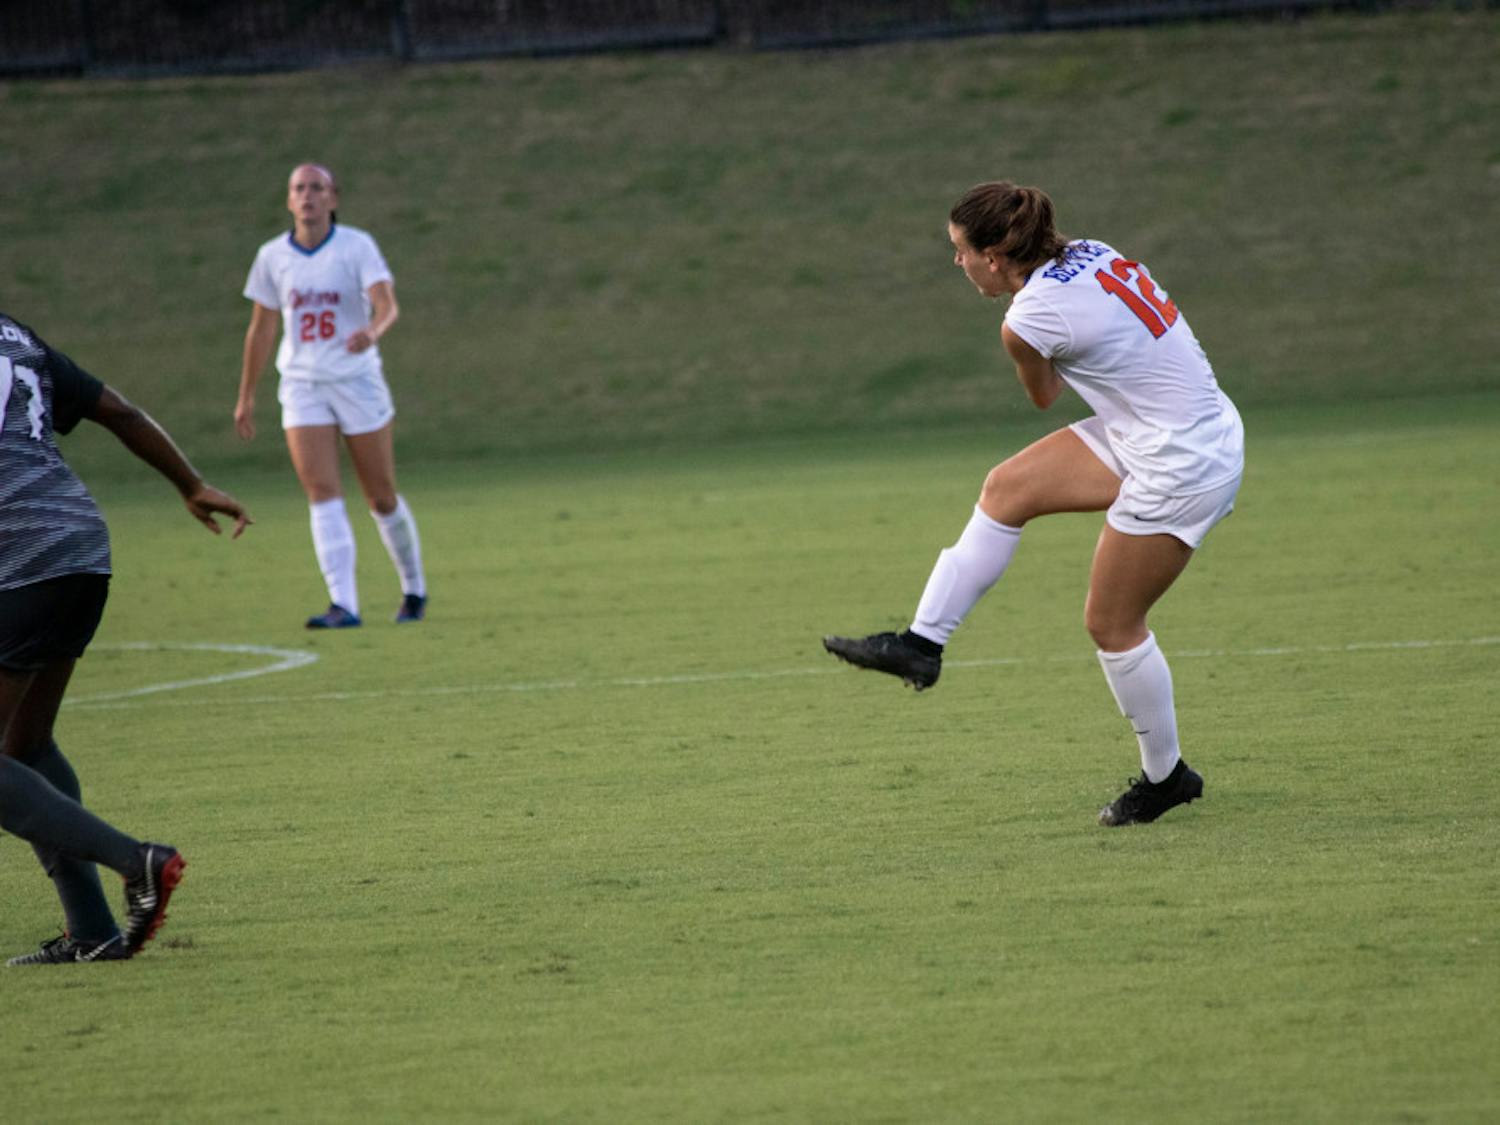 Midfielder Sammie Betters notched the sole assist in Florida’s 2-1 win over Texas A&amp;M on Tuesday night.